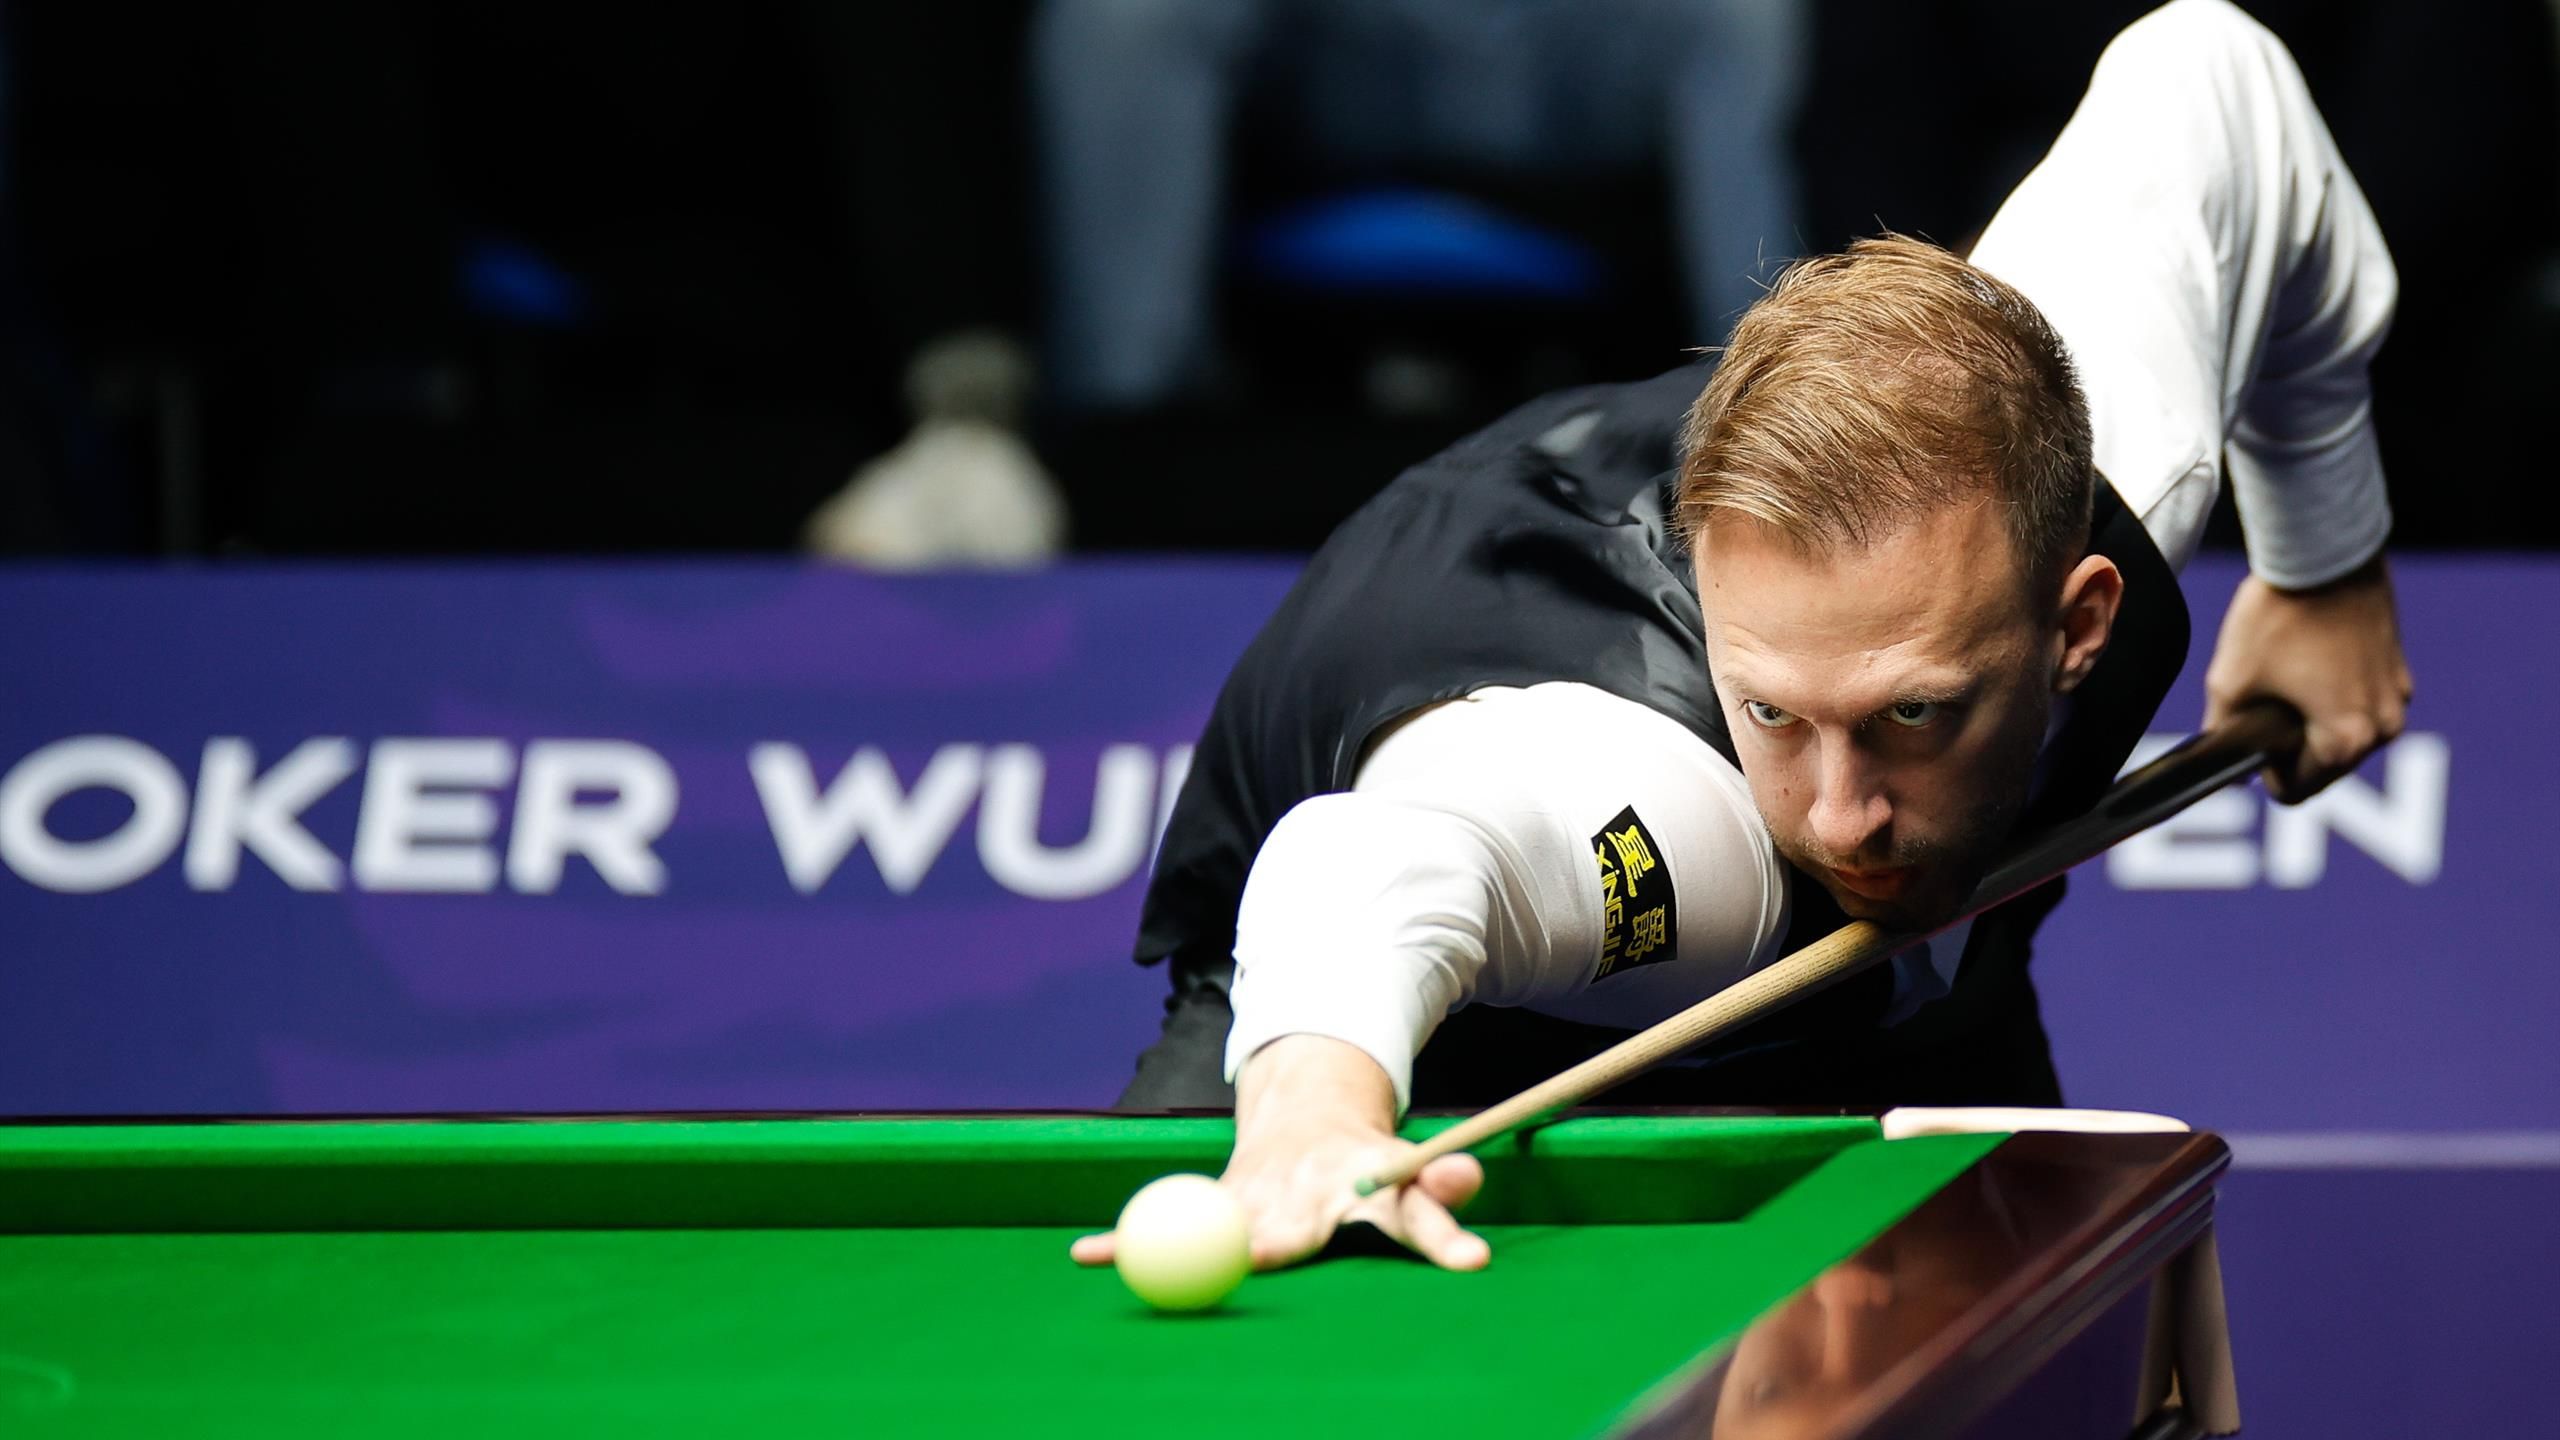 Wuhan Open snooker 2023 - Latest scores, results, schedule, order of play  as Judd Trump bids for glory - Eurosport